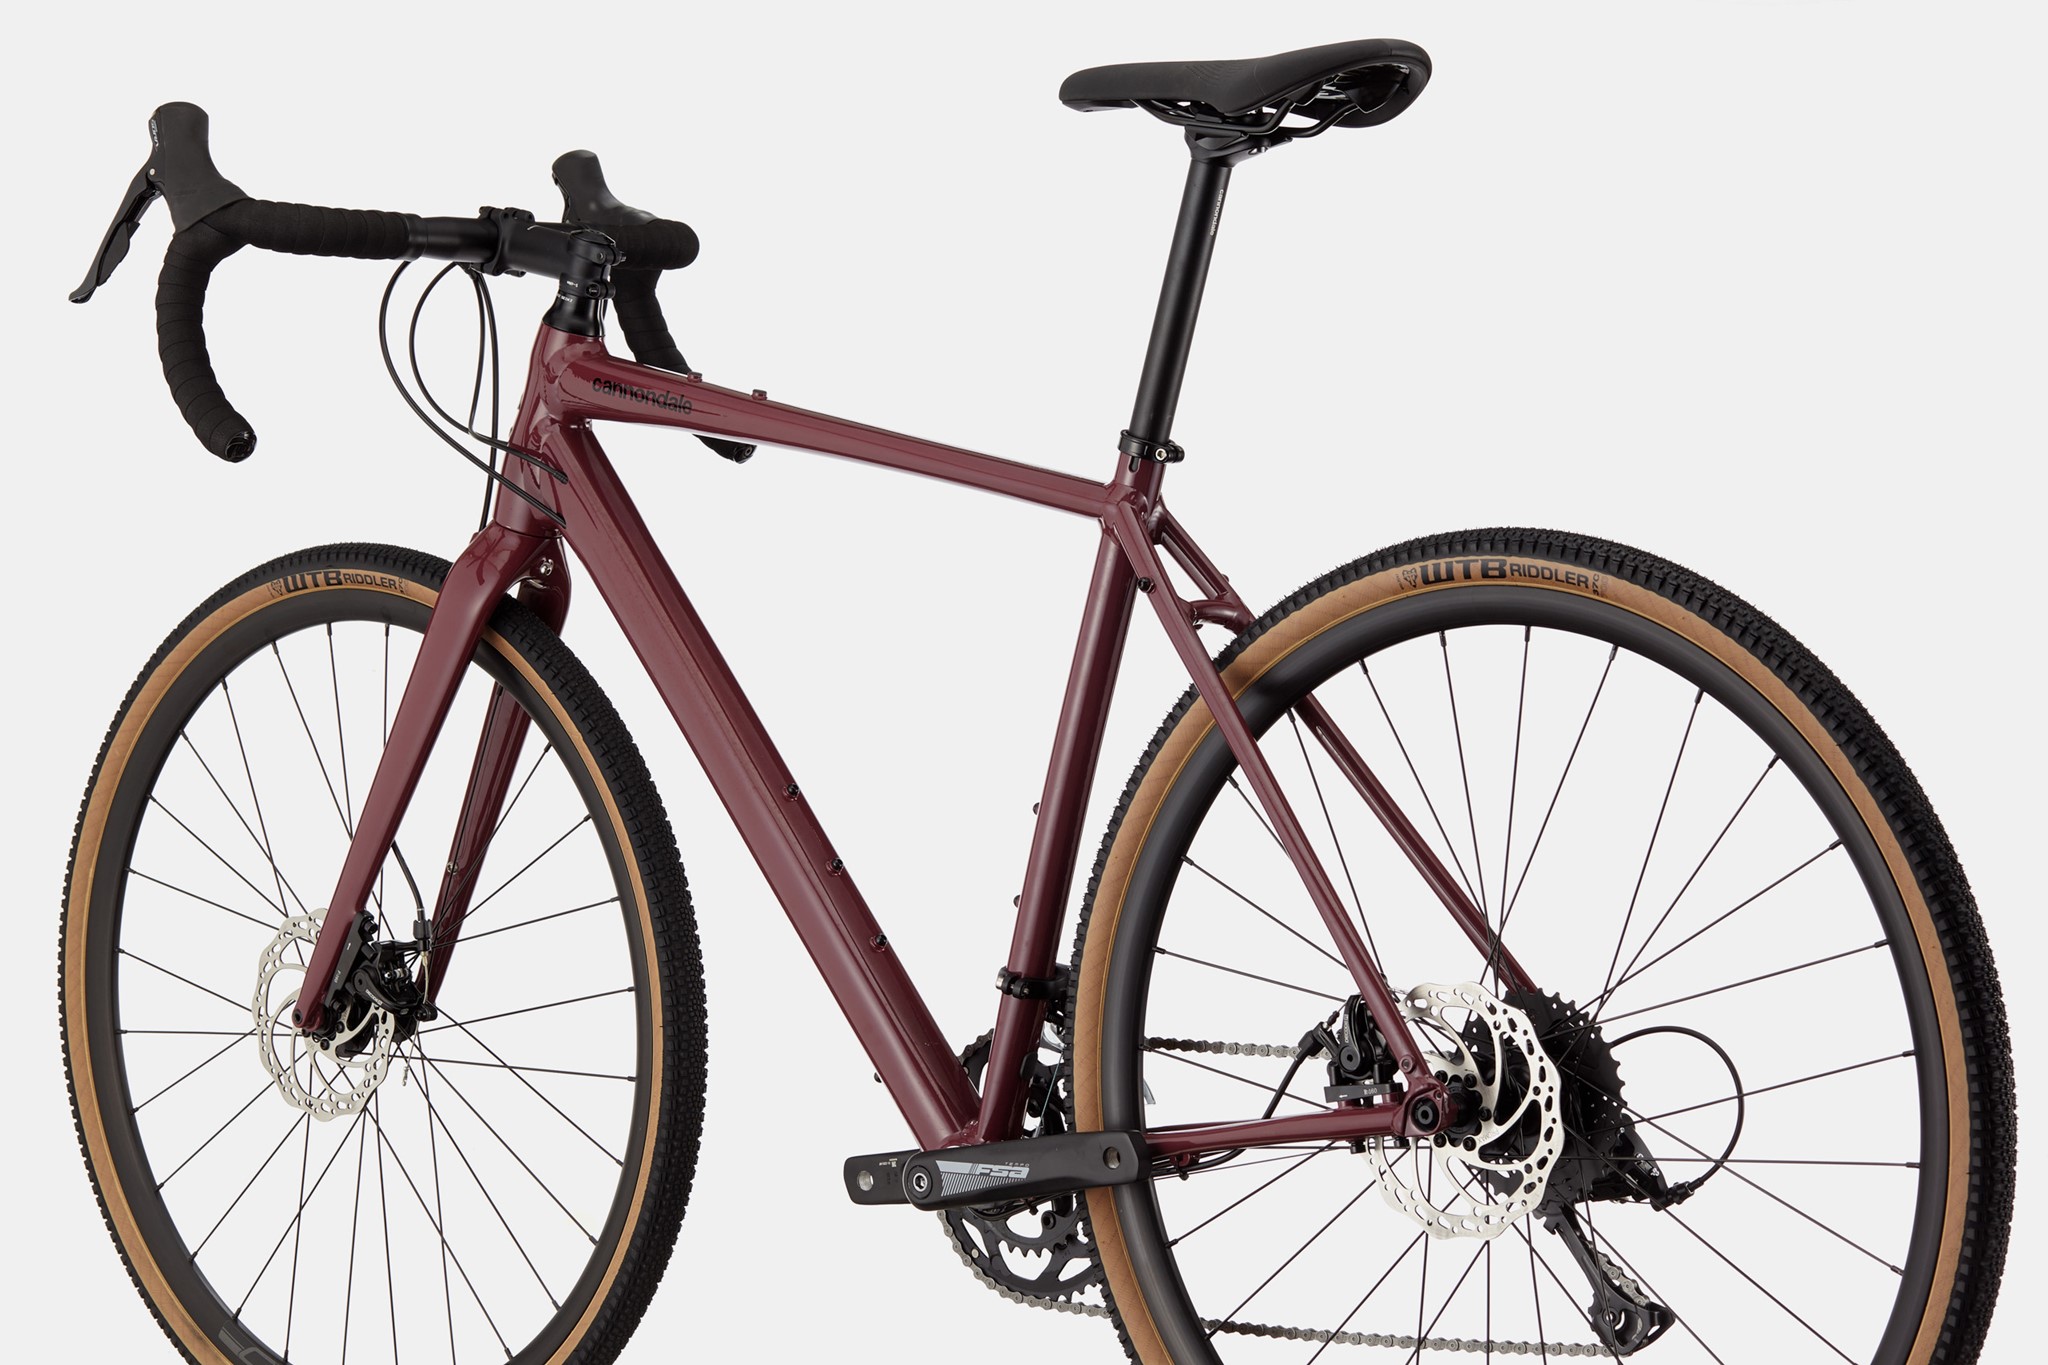 Cannondale Topstone 3 Gravel Bike 2021 - Black Cherry | The Cyclery